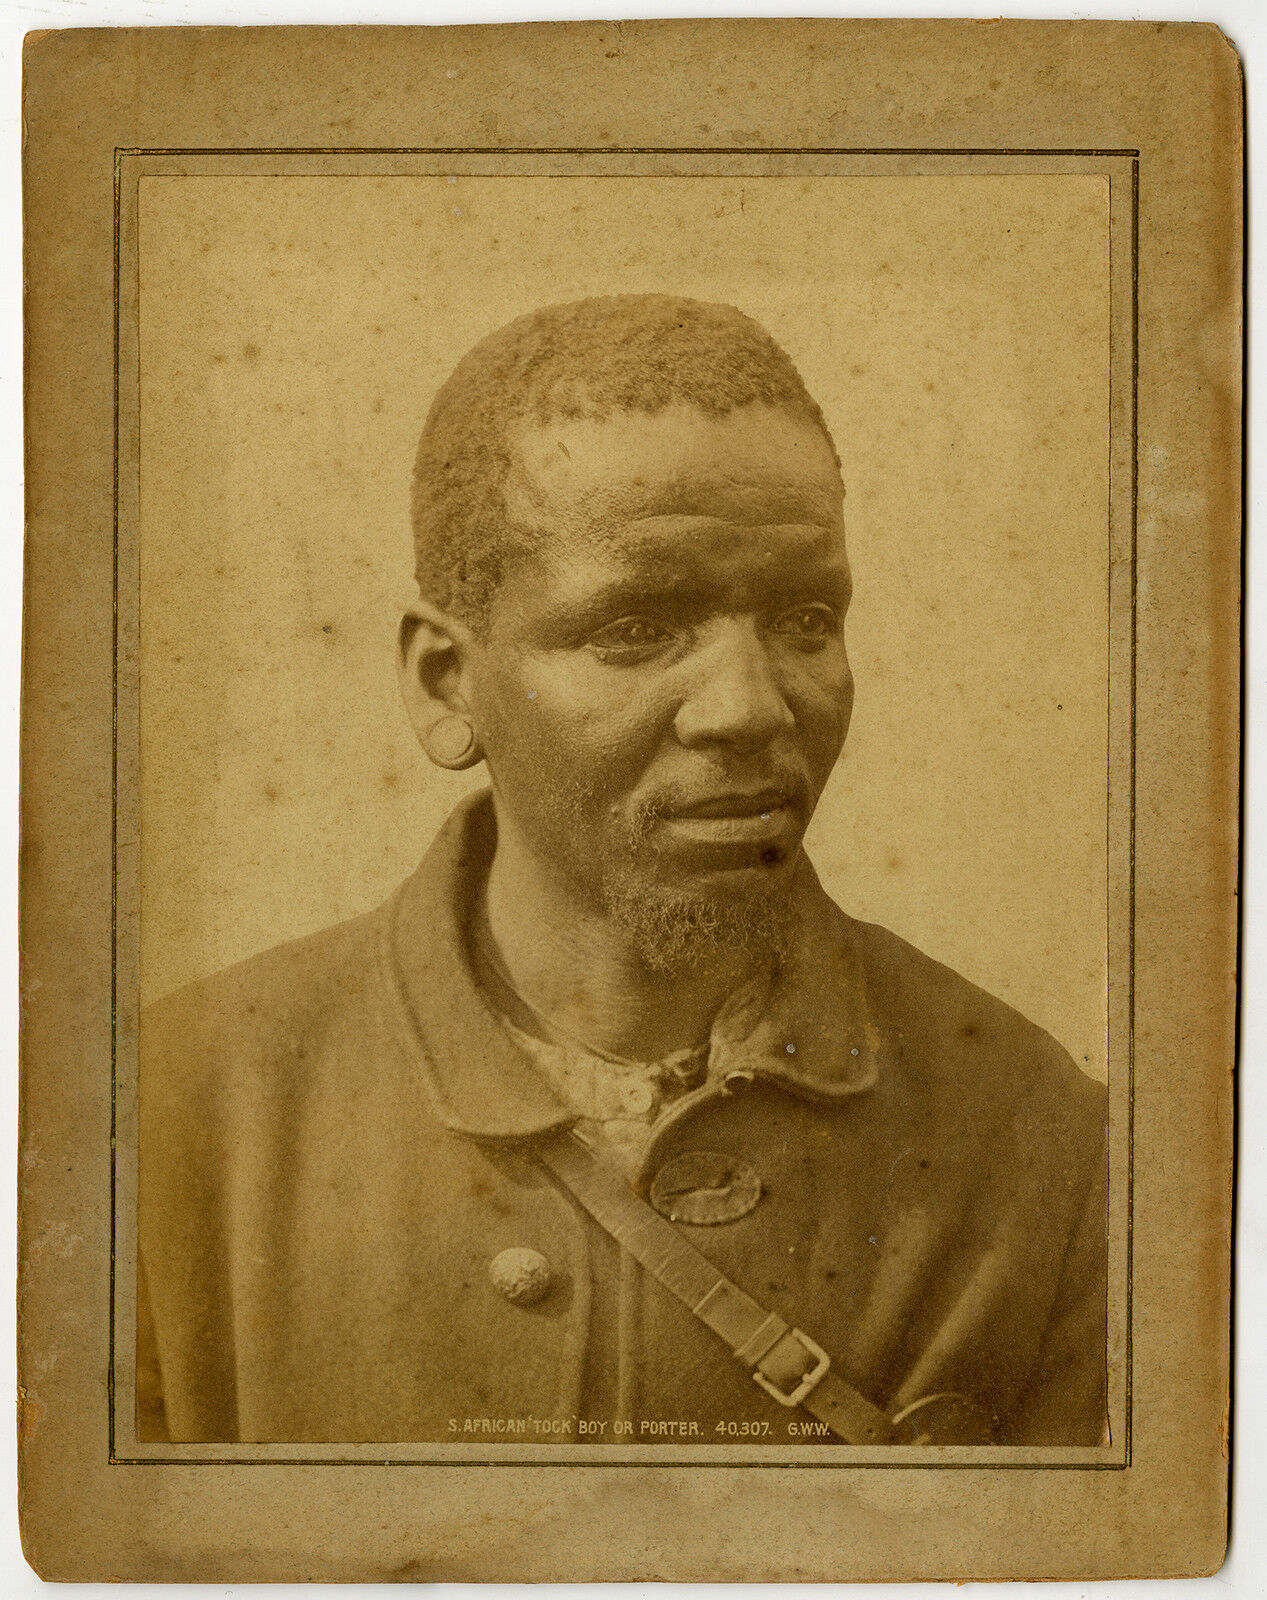 Antique photograph-Portrait of a South African porter by F. Hardie-1900